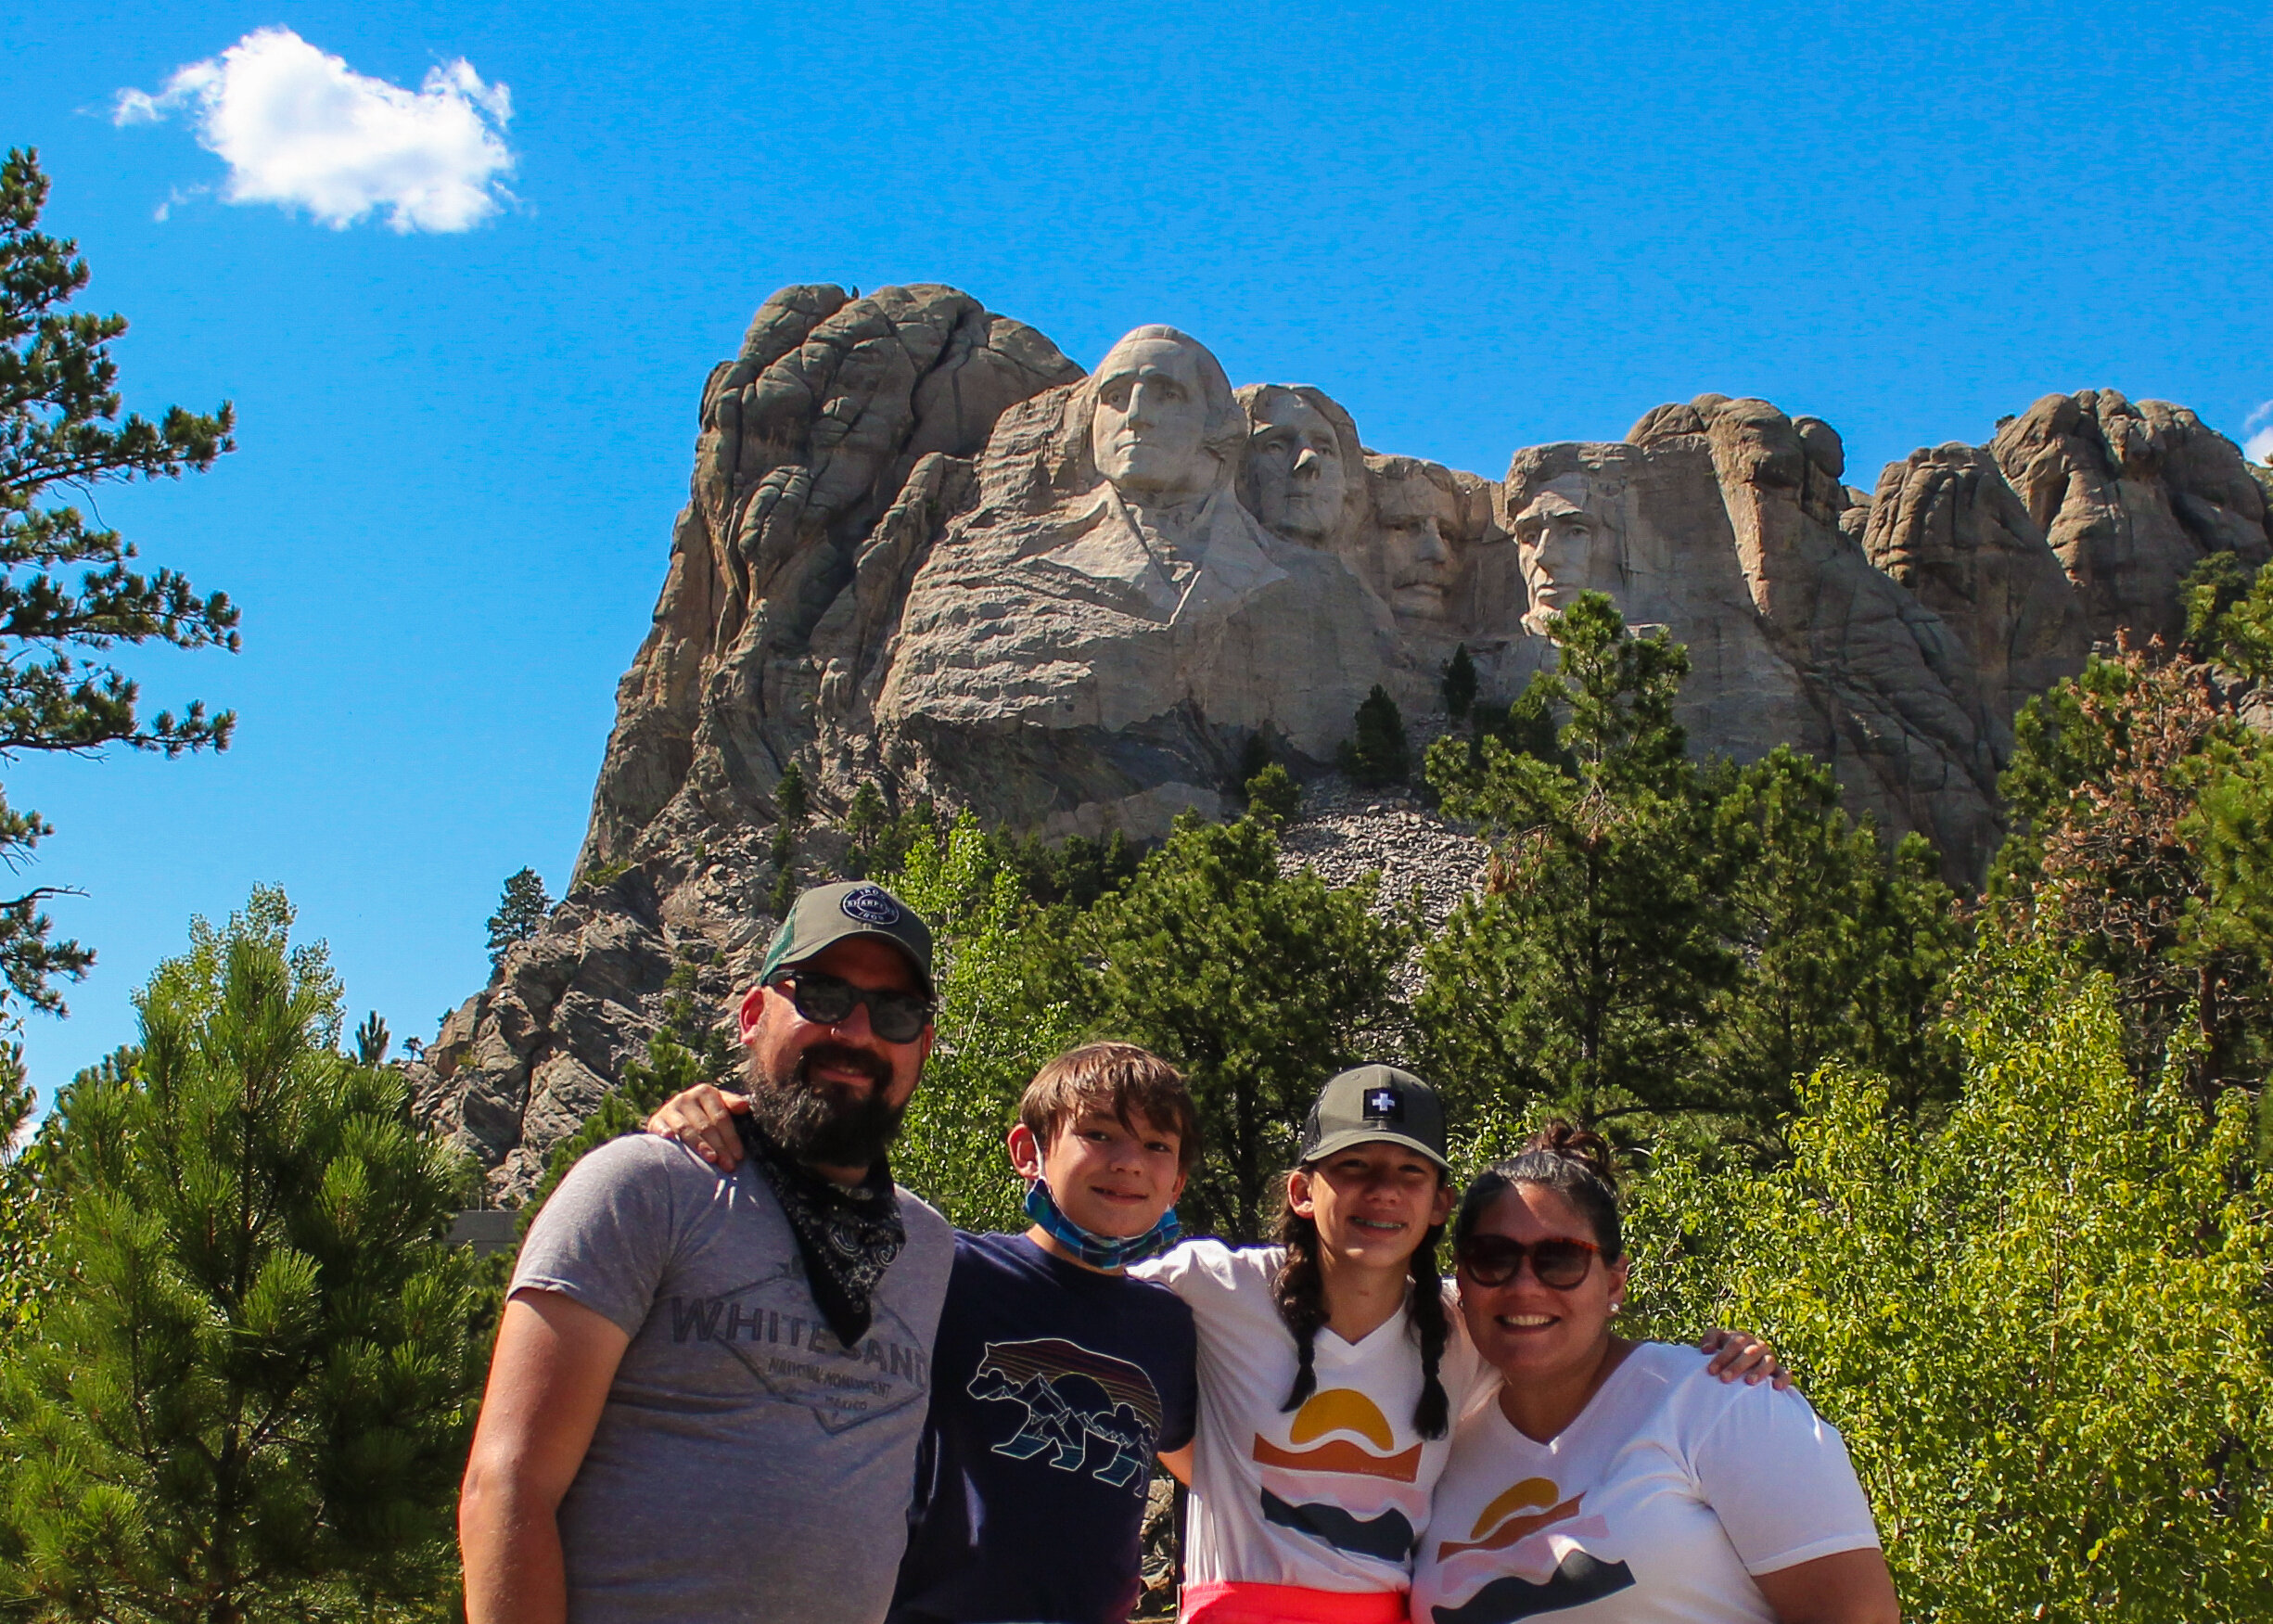 Visiting Mount Rushmore was one of the highlights of our National Parks Vacation.